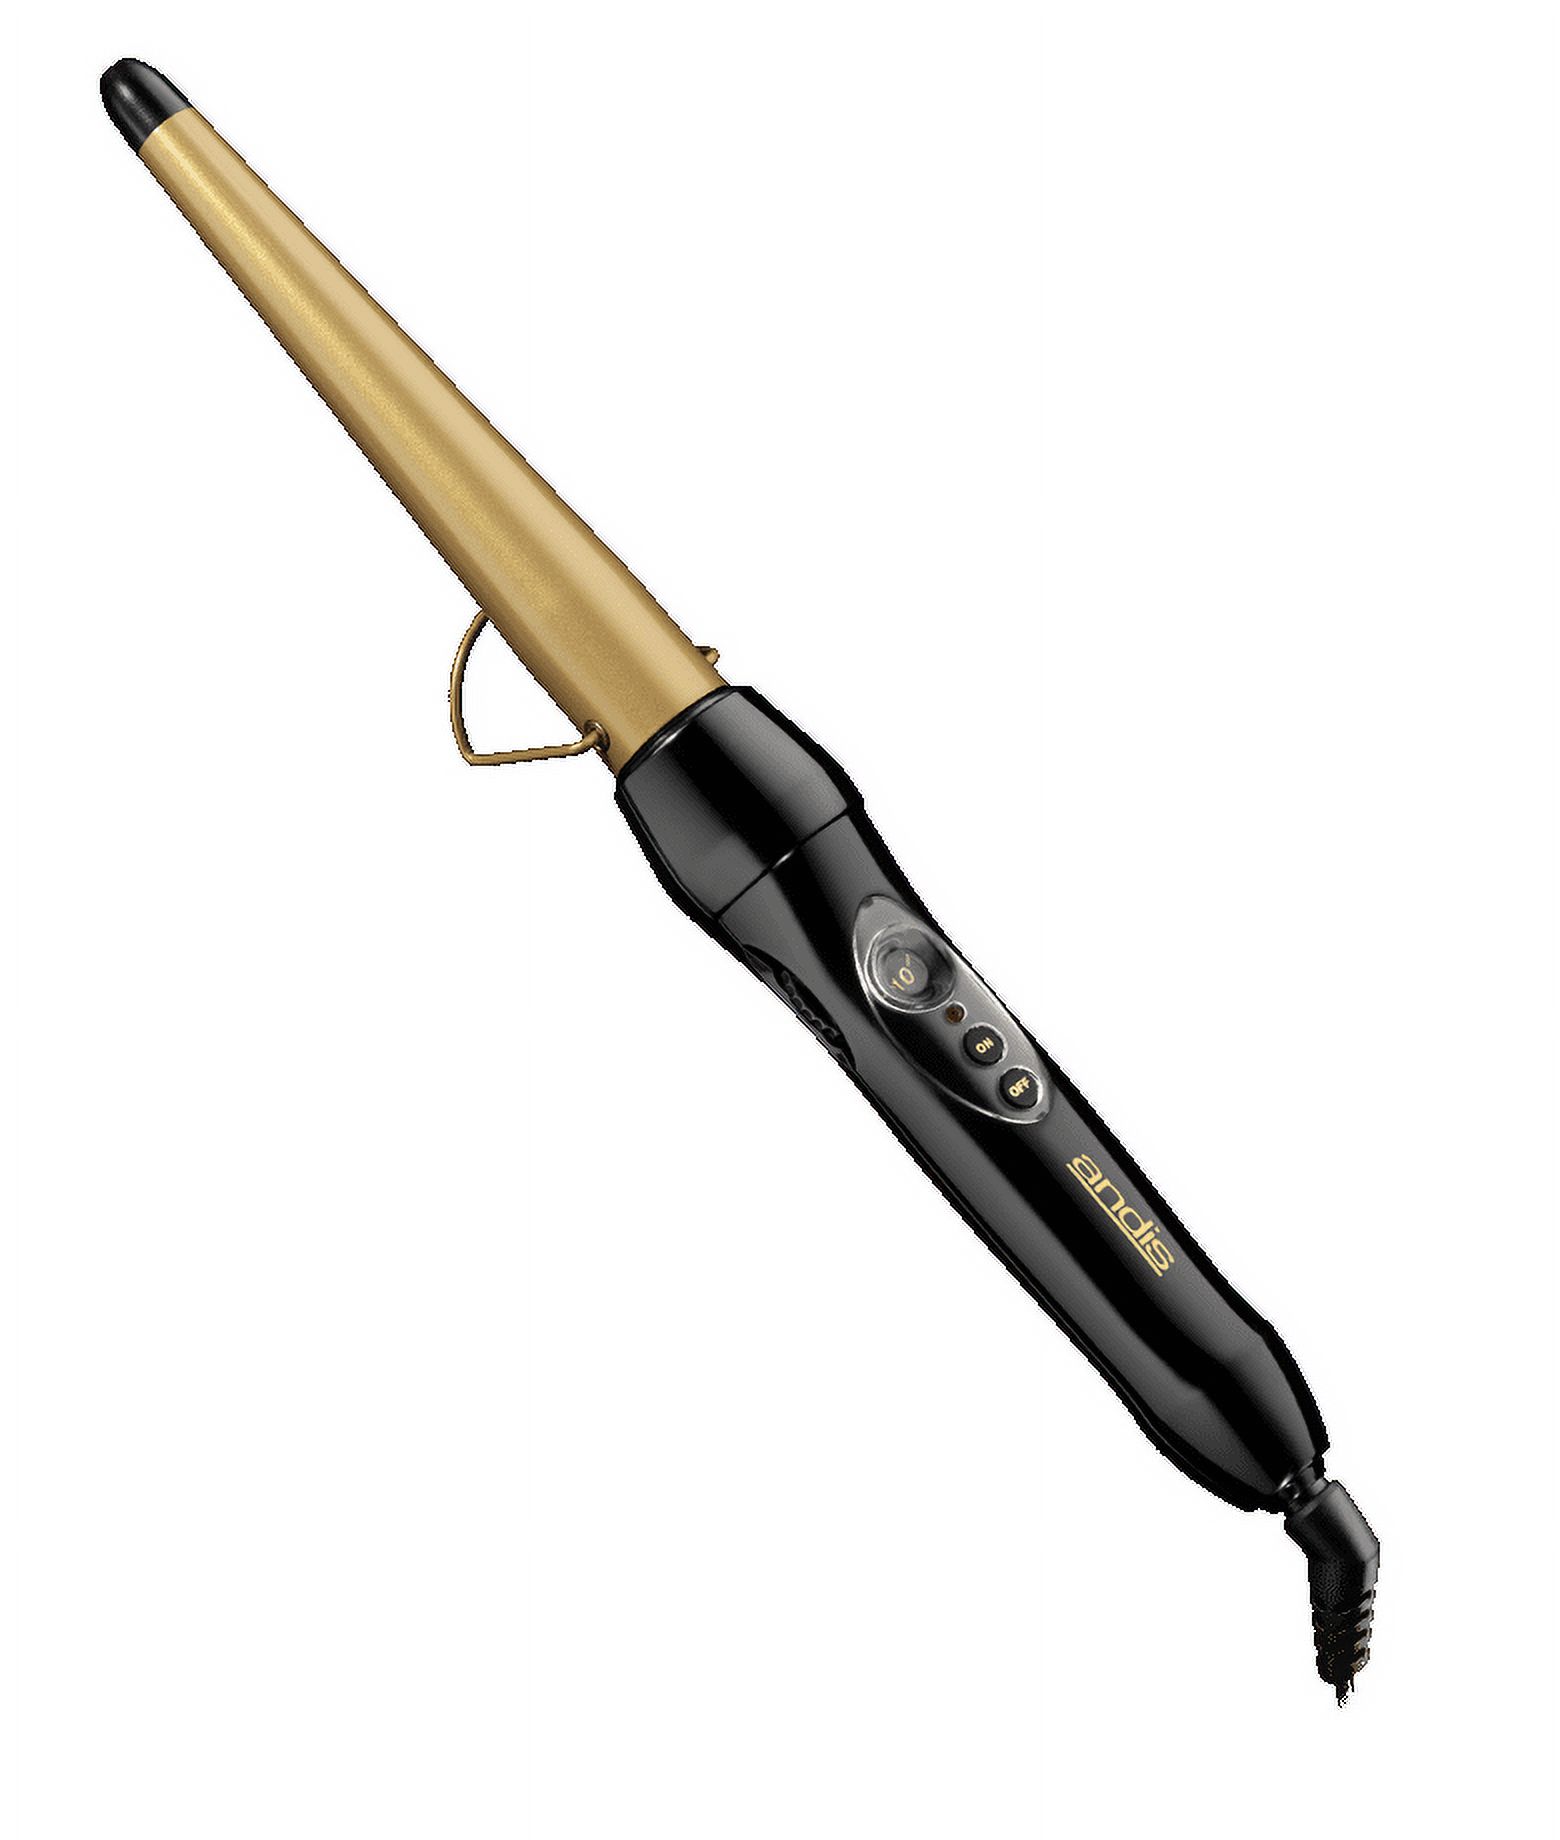 Andis High Heat Gold Ceramic Conical Curling Wand, 1-Inch - image 1 of 4